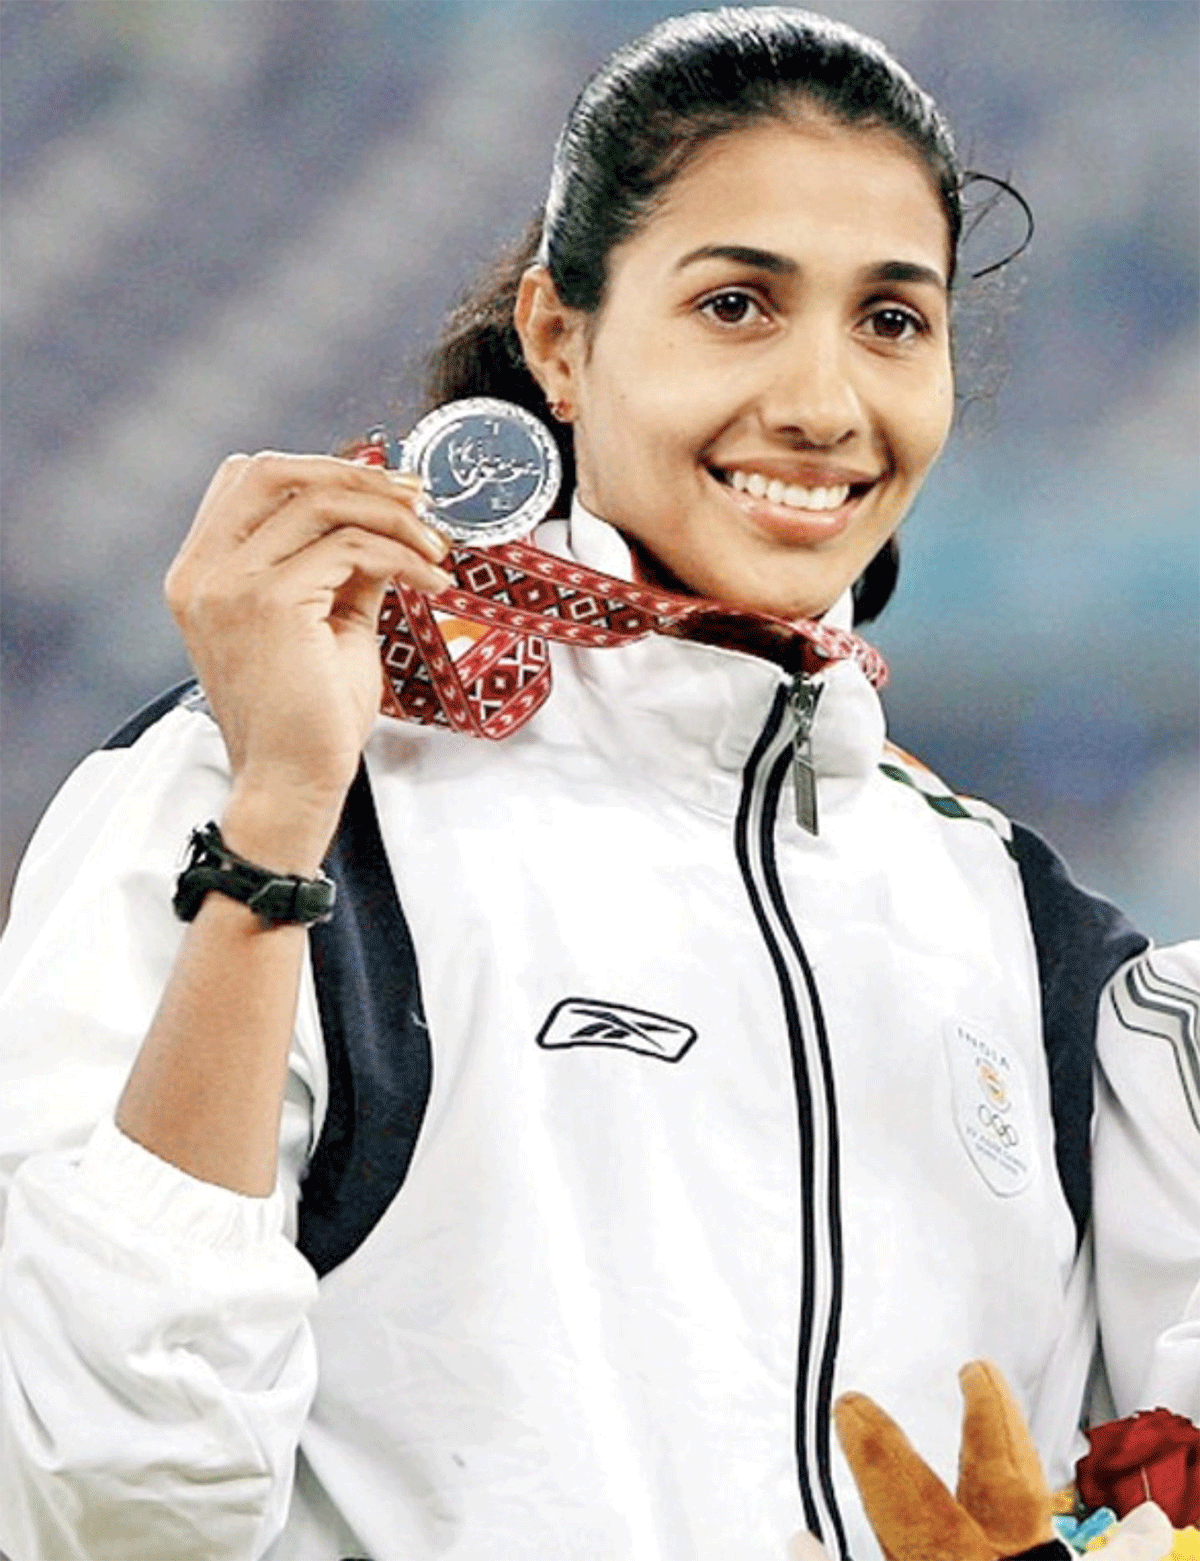 Hailing from Kerala, Anju Bobby George is India's only medallist at the IAAF World Championships (Paris, 2003), a gold medallist in the IAAF World Athletics Finals (Monaco, 2005).